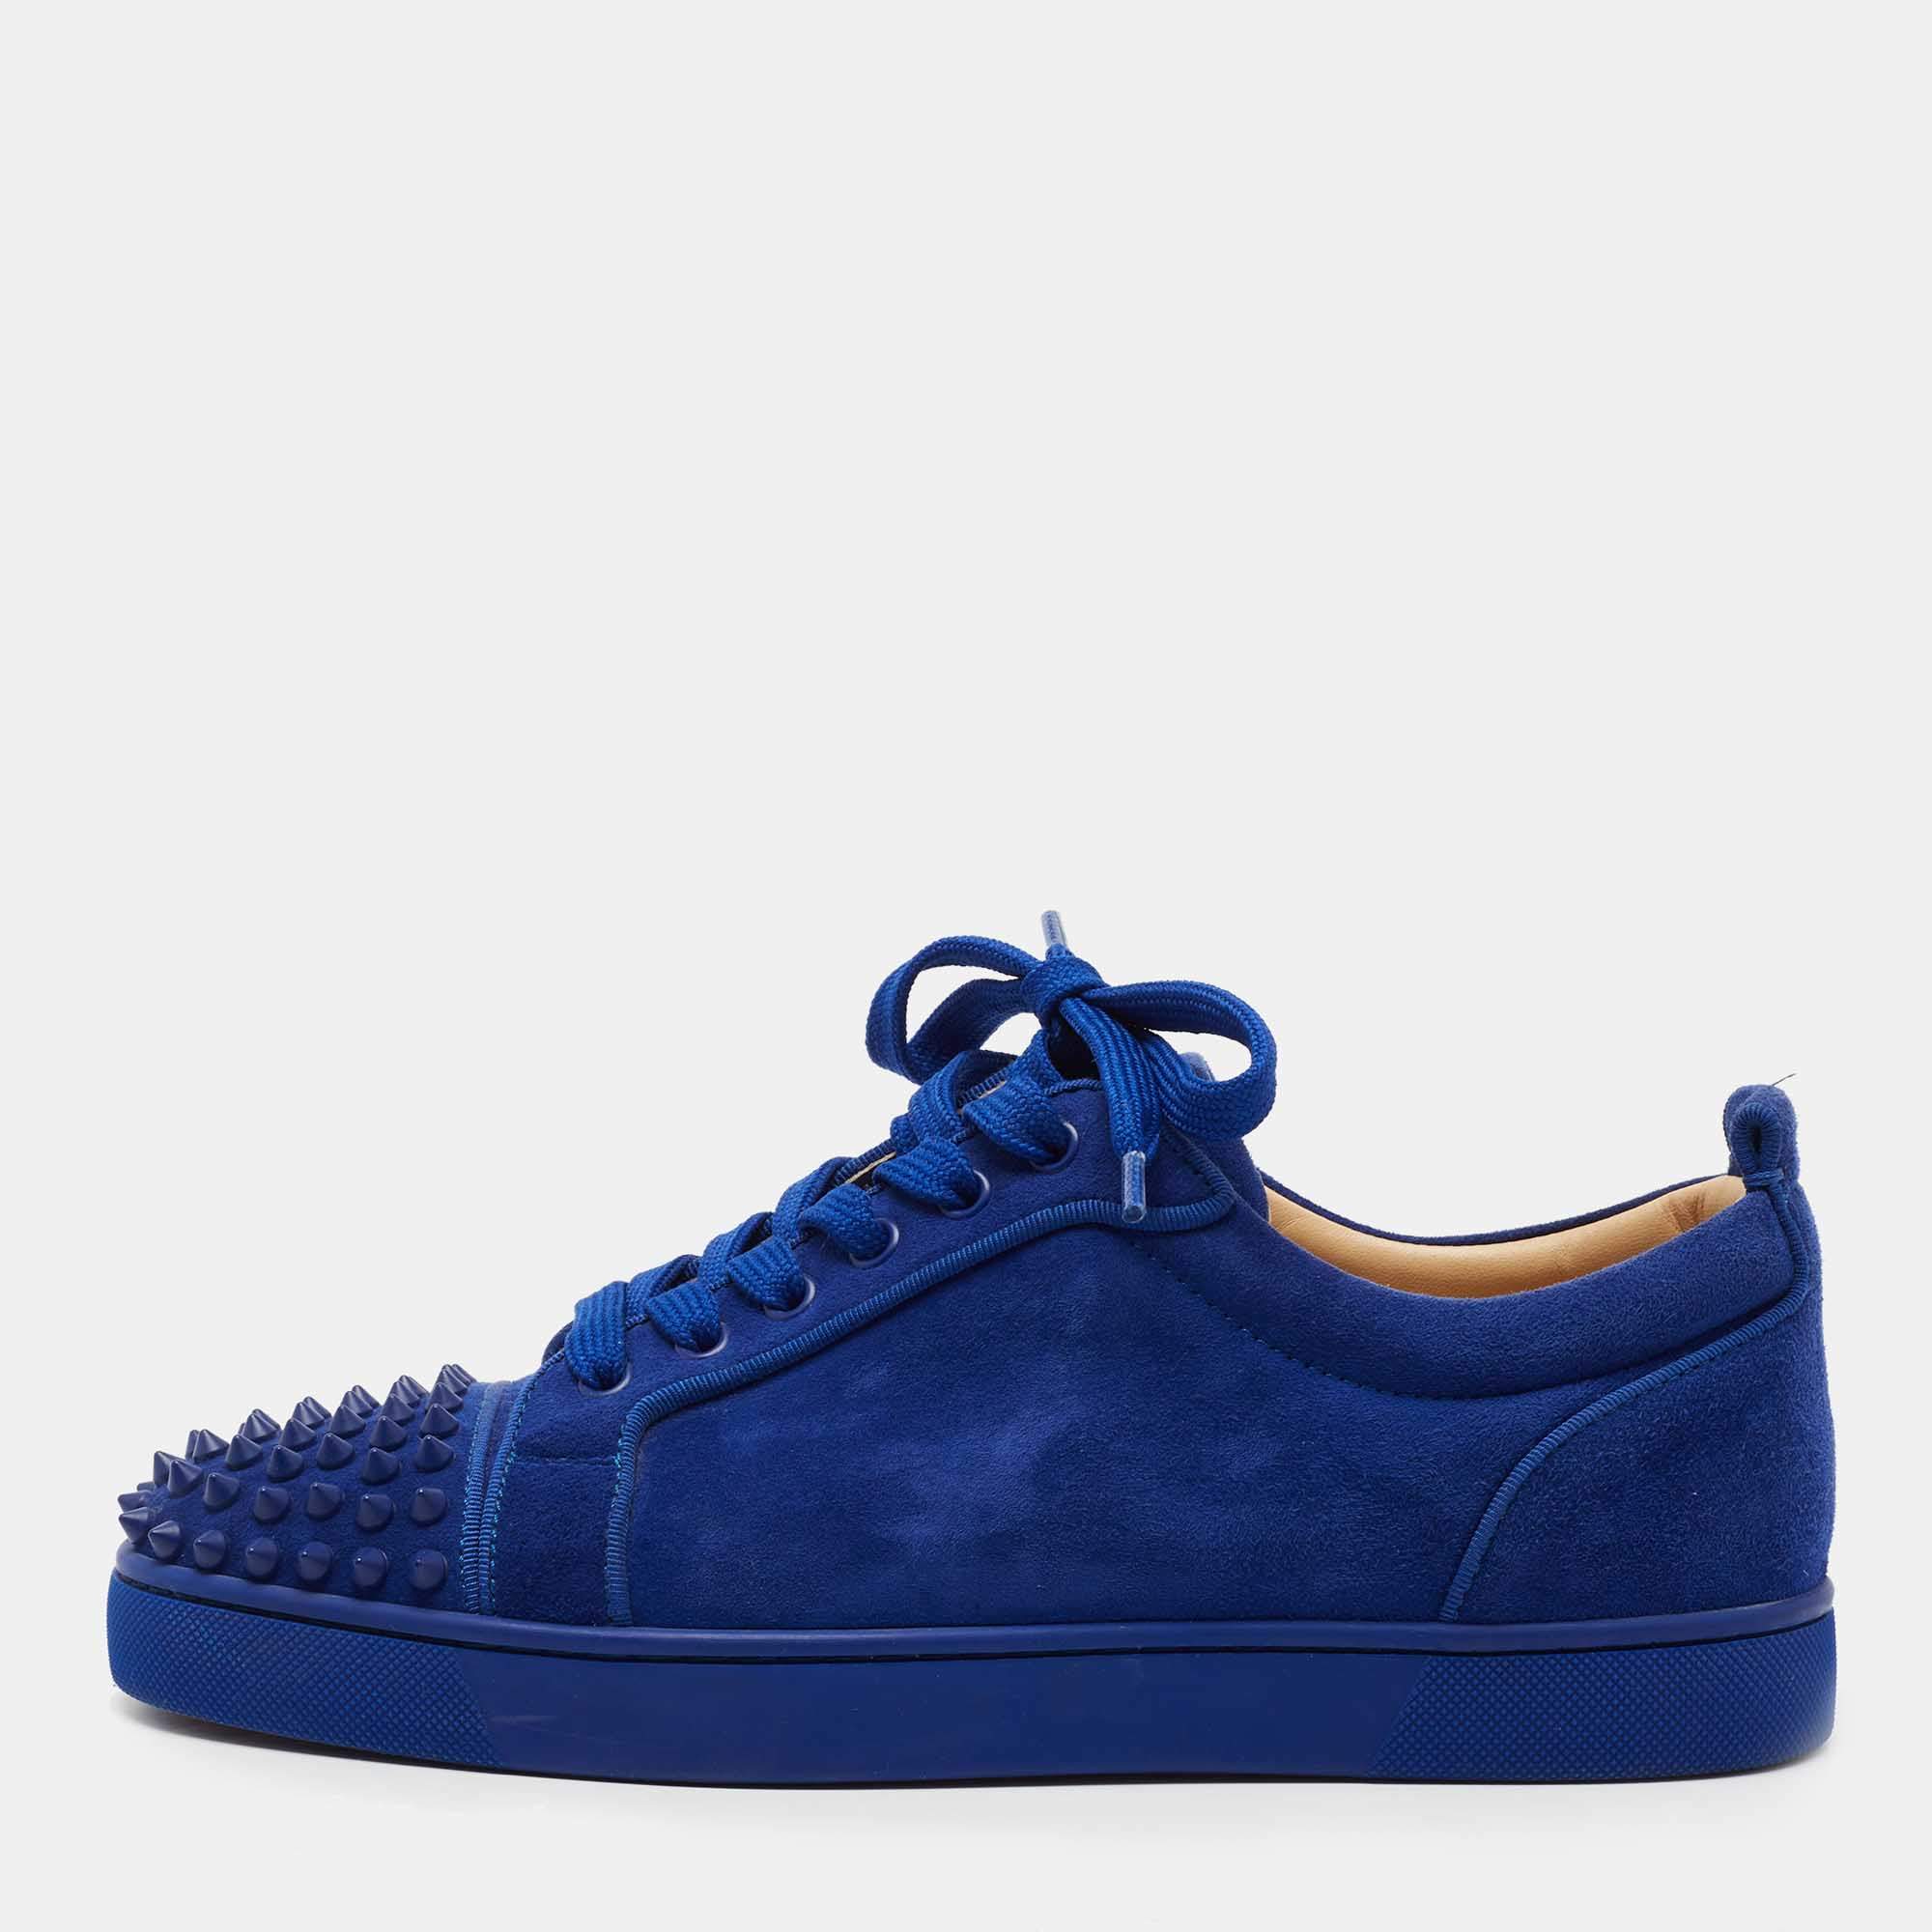 Christian Louboutin Navy Blue Suede and Leather Lace Up Sneakers Size 40.5  Christian Louboutin | The Luxury Closet